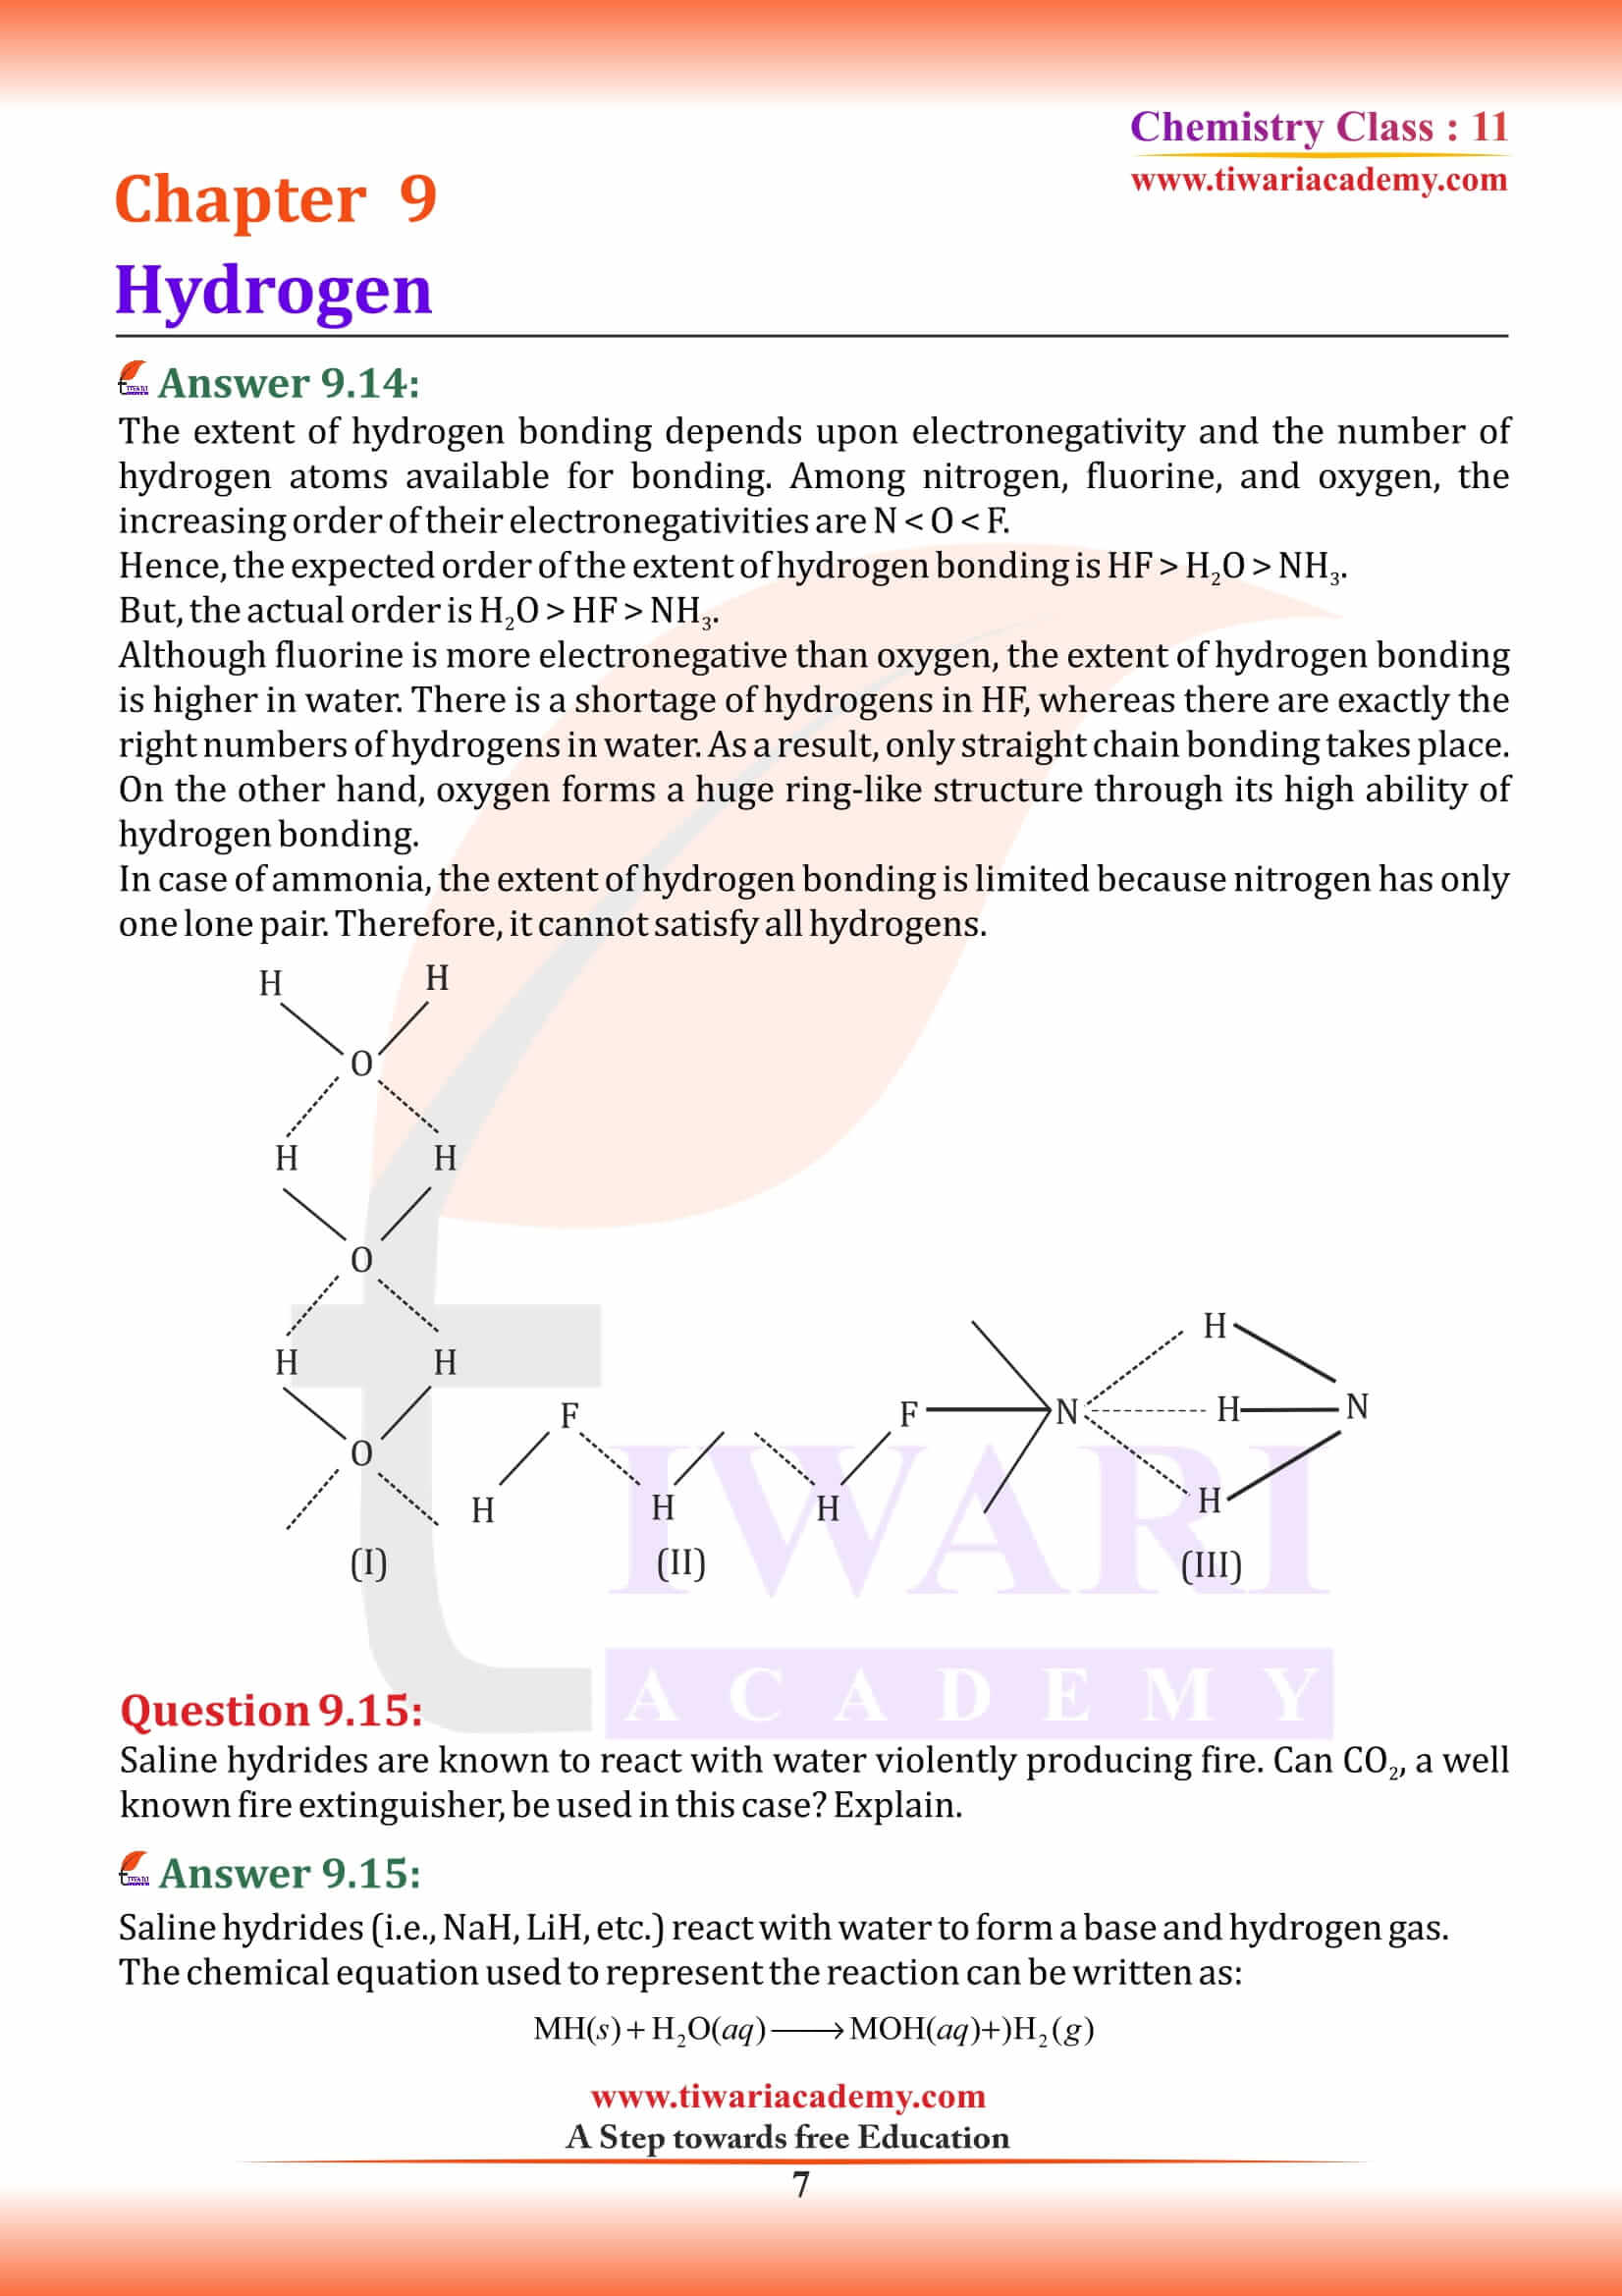 NCERT Solutions for Class 11 Chemistry Chapter 9 MCQ answers